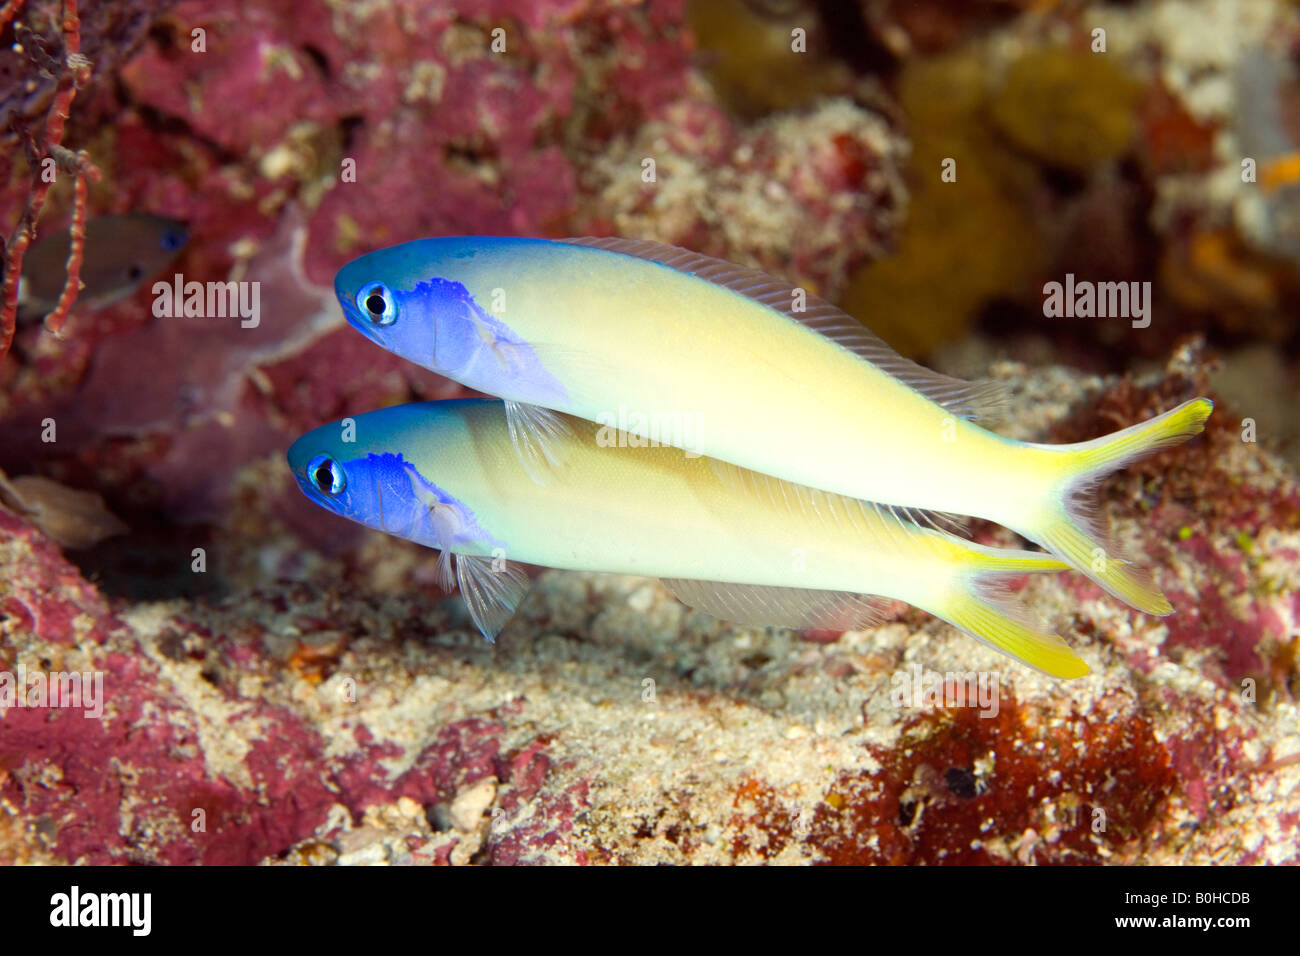 Blue head tilefish, Hoplolatilus starcki, pair swimming together near their home in the side of the reef Stock Photo